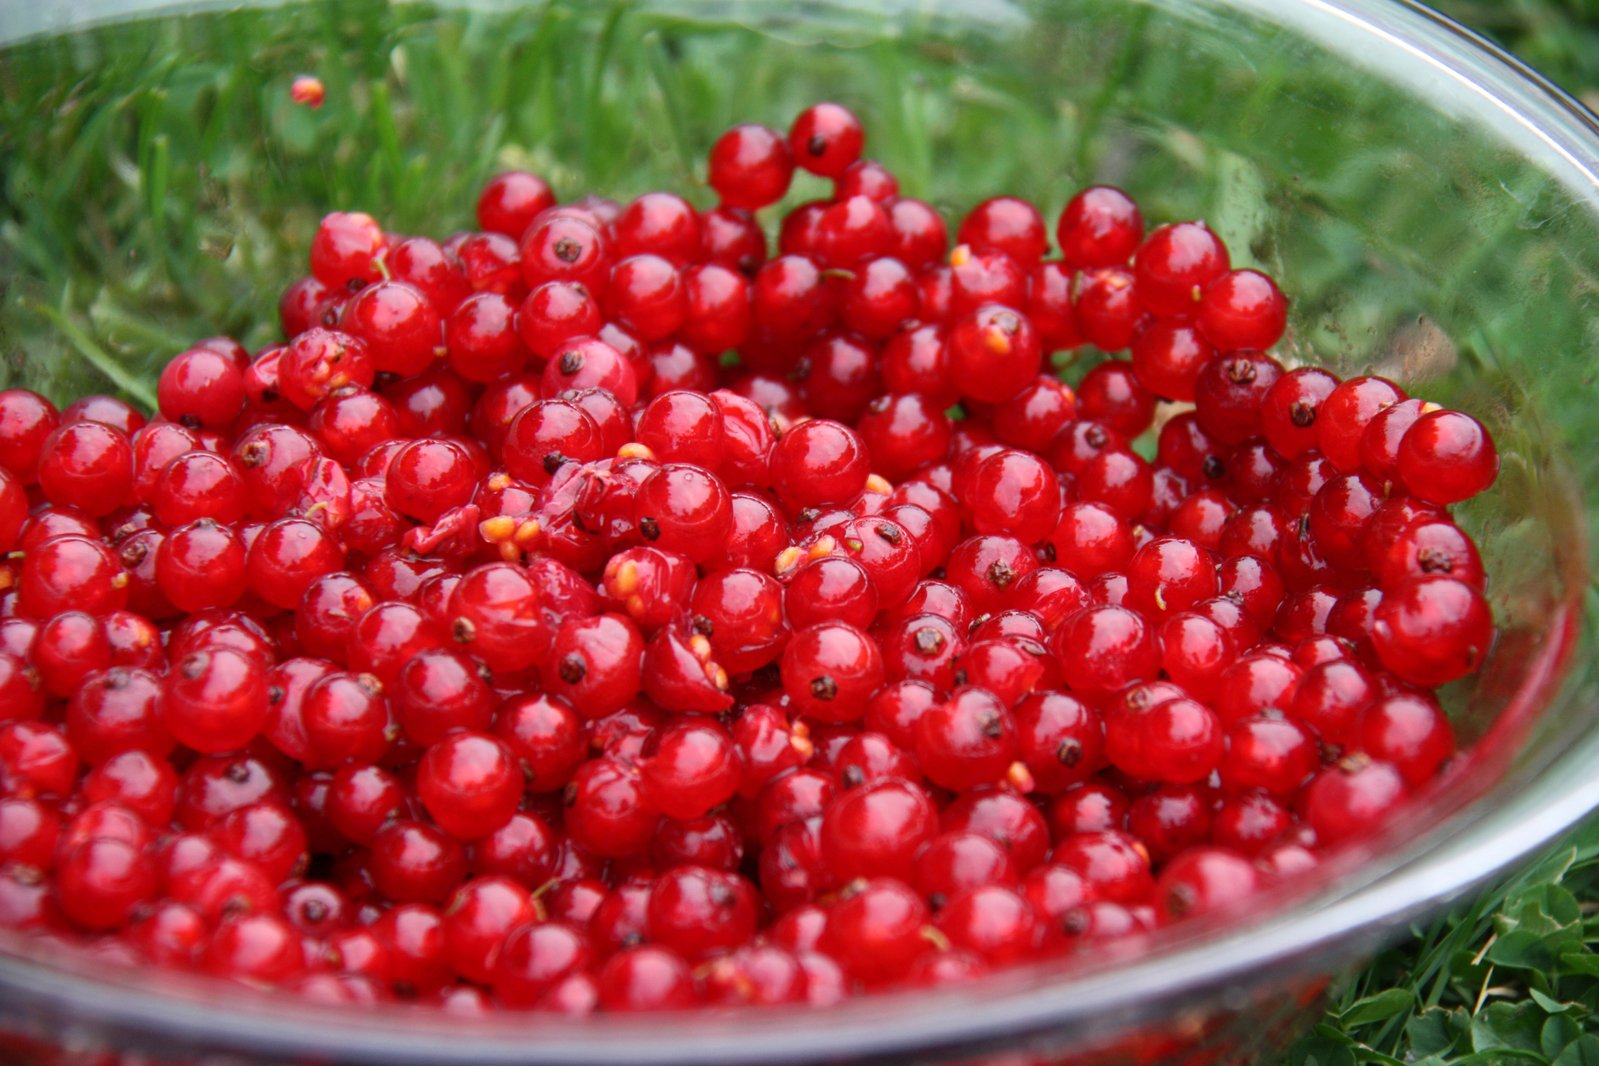 red berries with red caps in a large bowl on grass